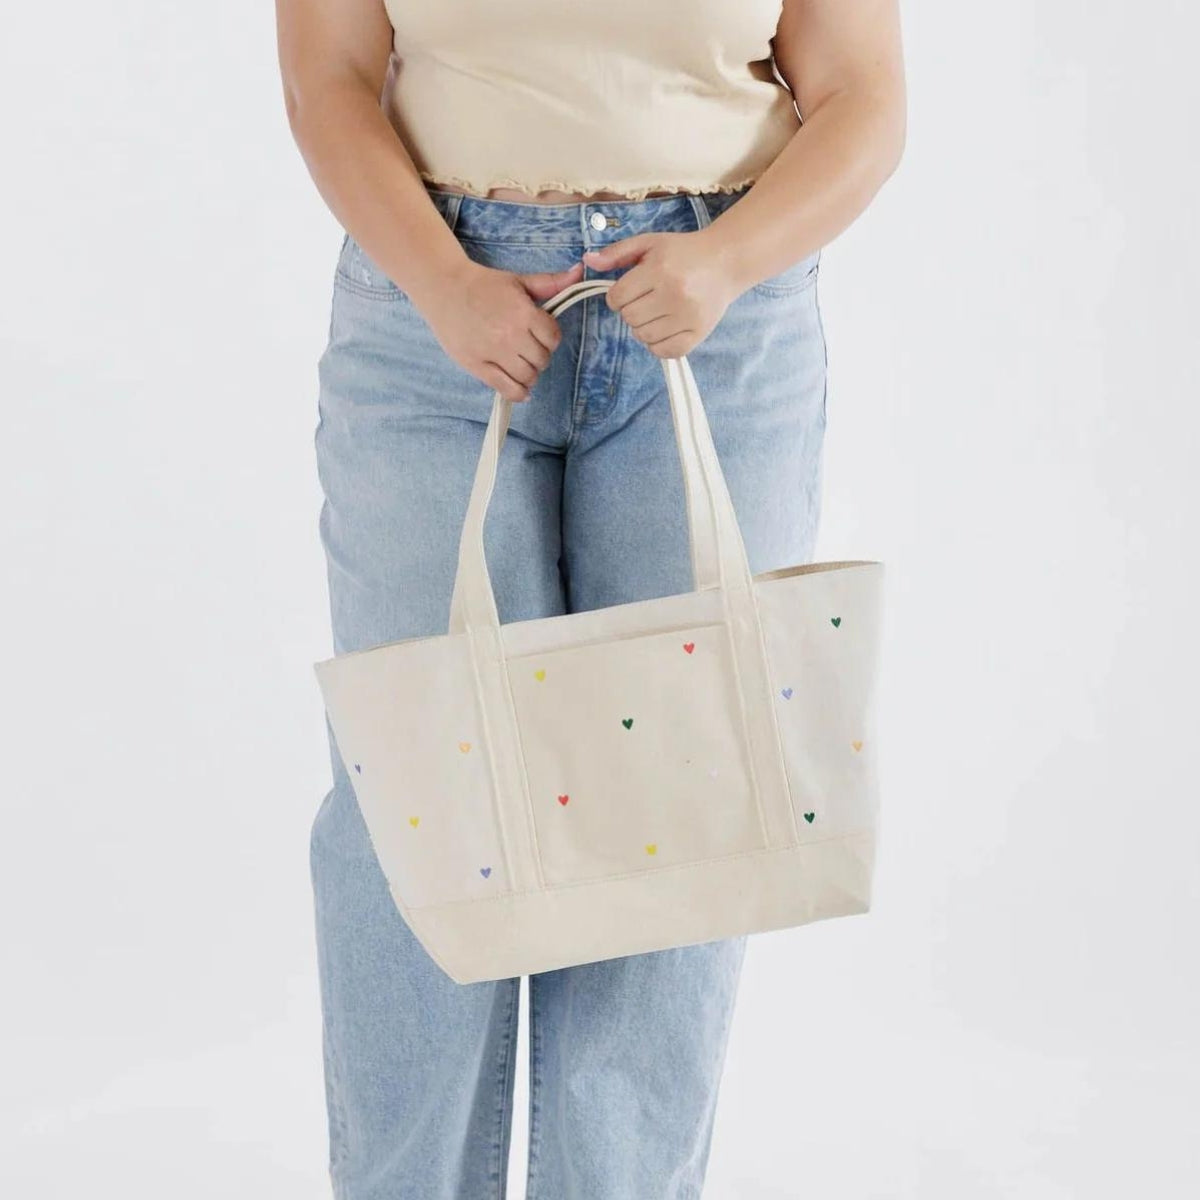 Baggu Medium Heavyweight Canvas Tote in Embroidered Hearts